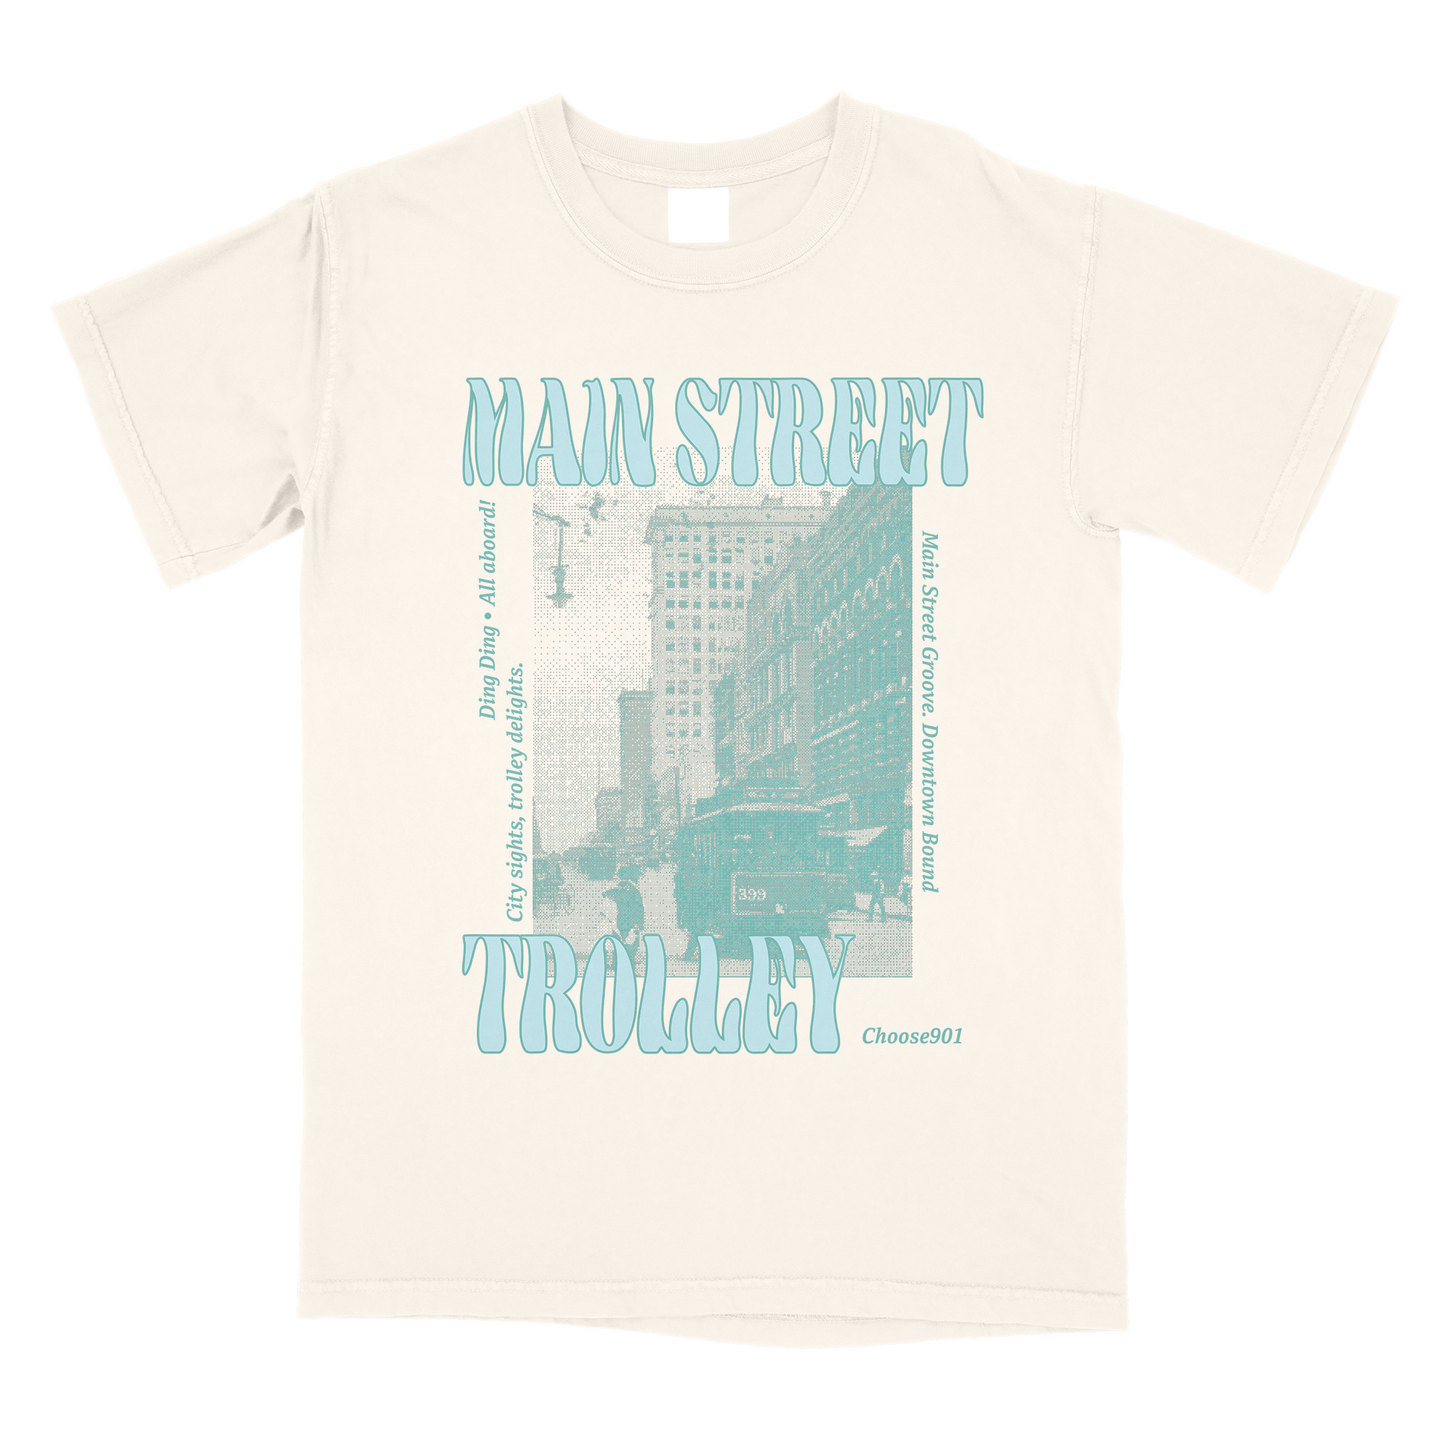 White Choose901 shirt featuring a Main St. Trolley Halftone on Ivory print with "main street trolley" text and an image of a trolley in front of a building, along with decorative elements and text.